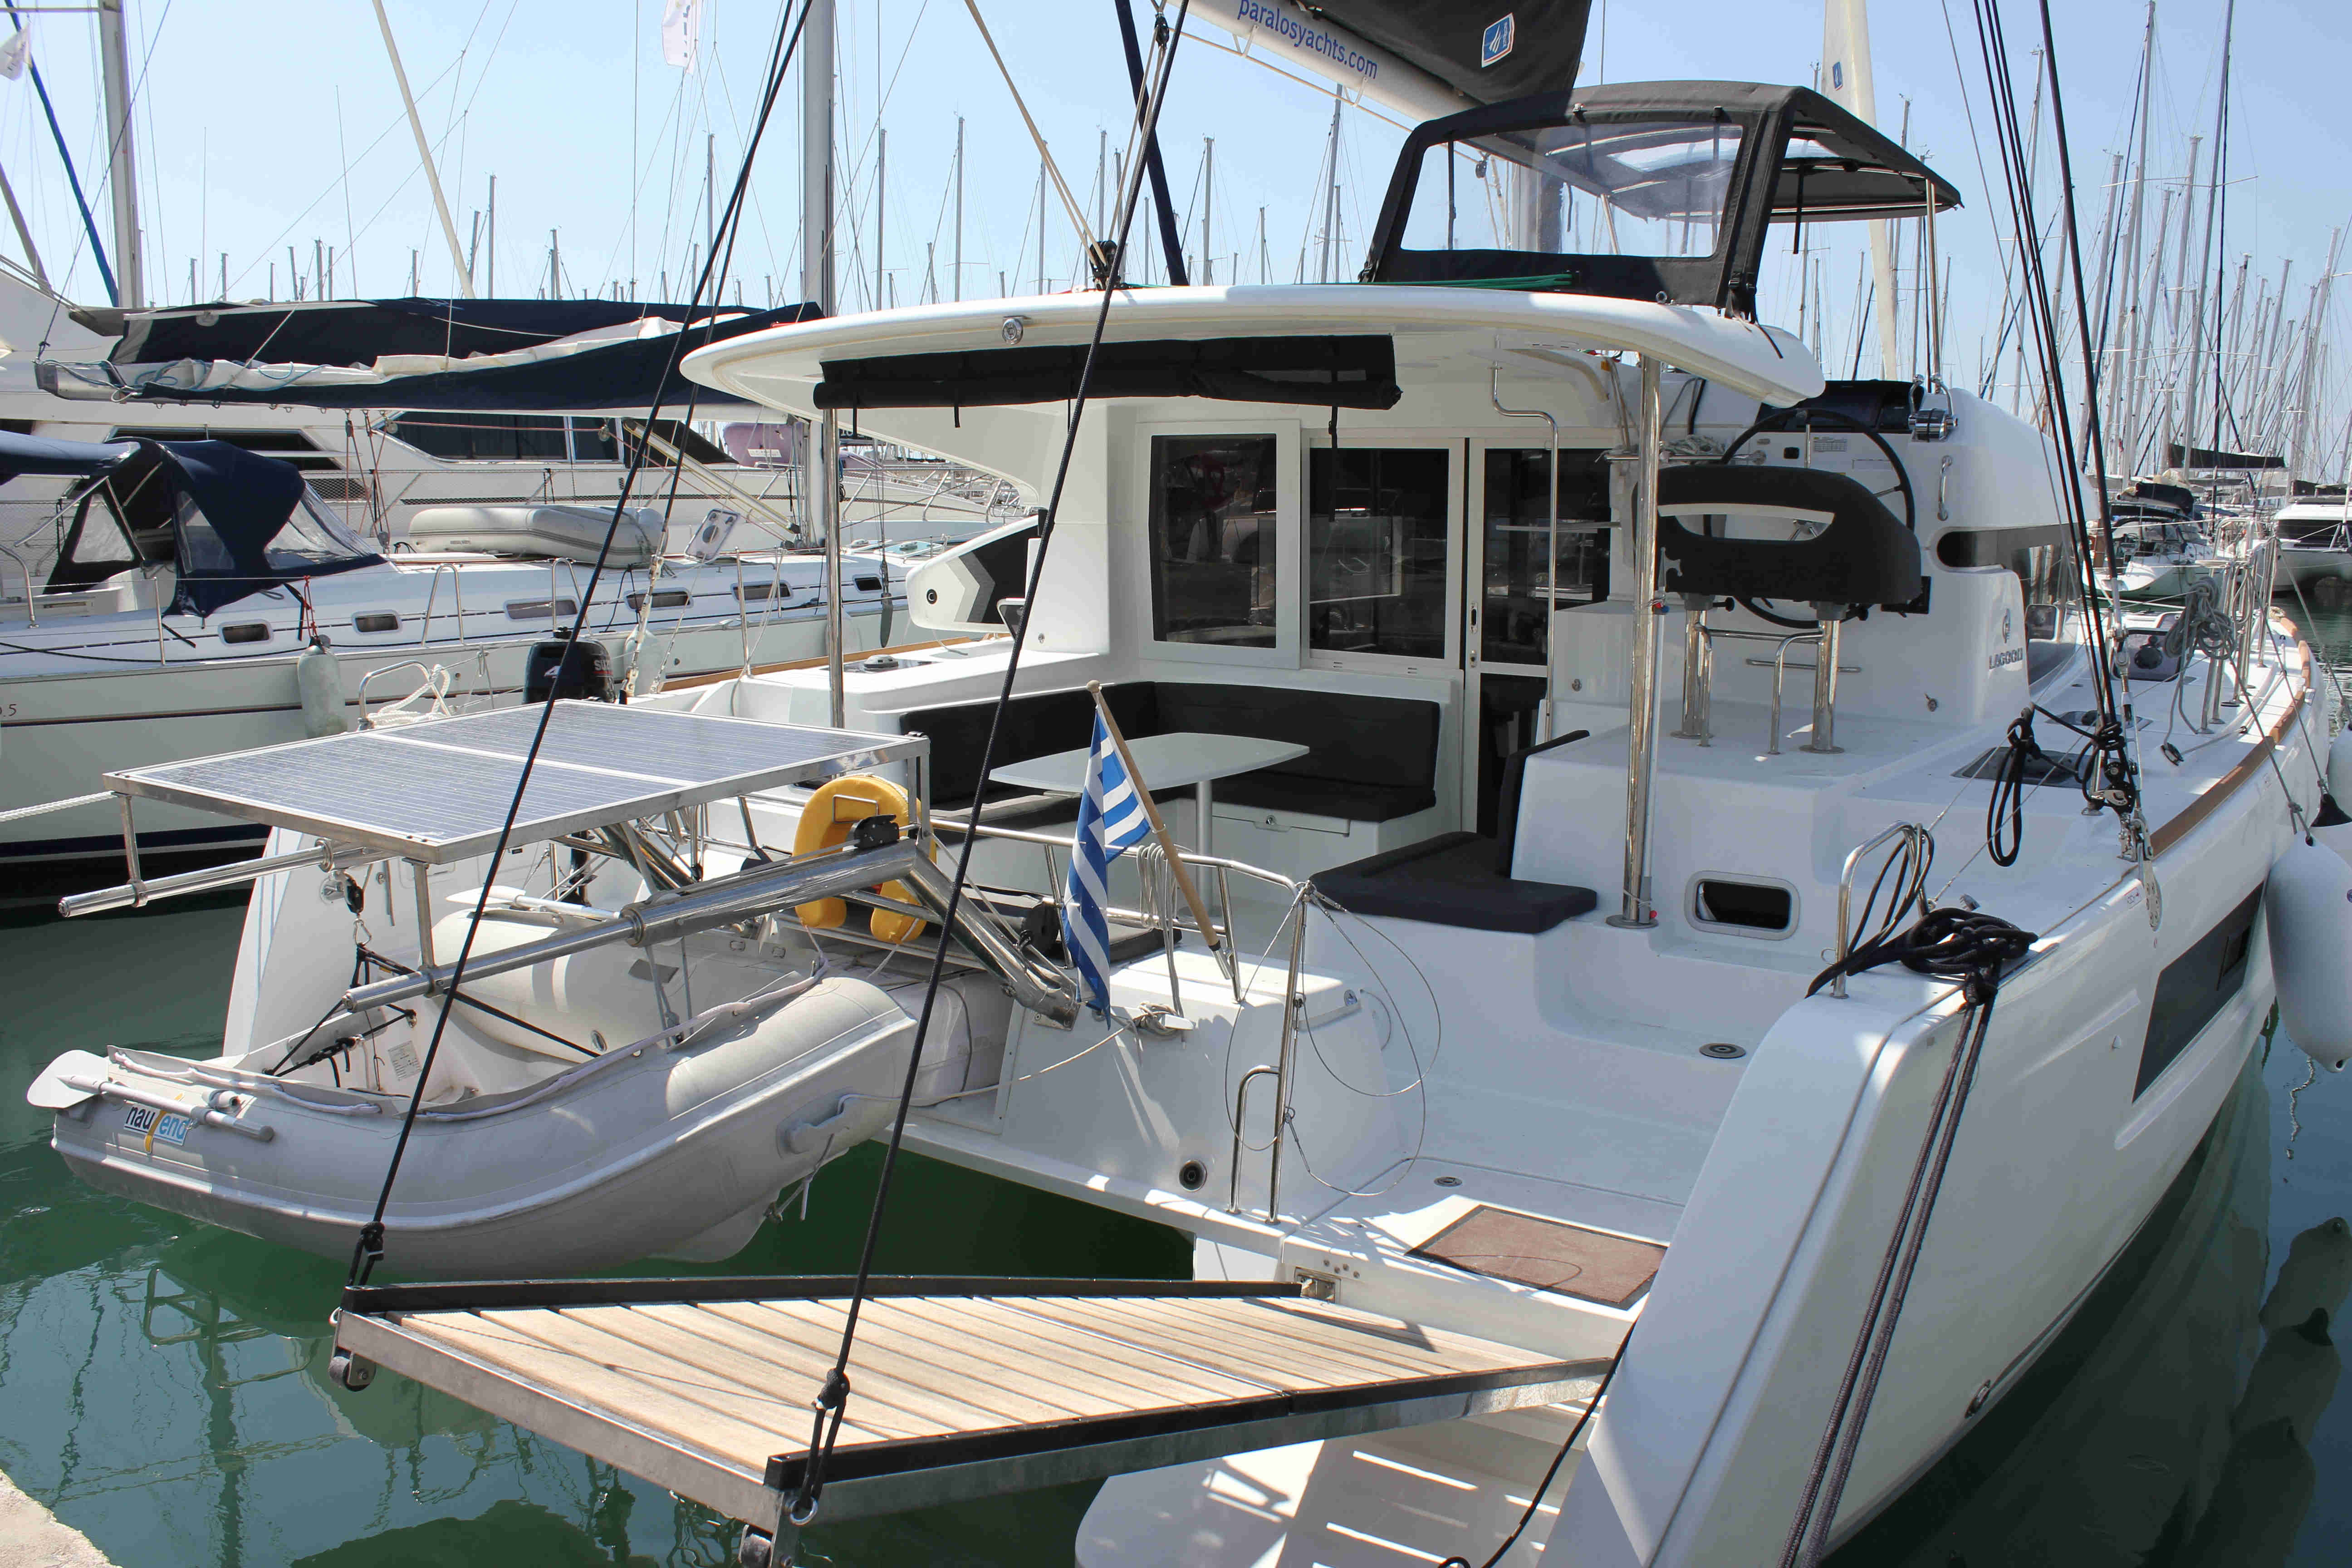 Lagoon 40 - Alimos Yacht Charter & Boat hire in Greece Athens and Saronic Gulf Athens Alimos Alimos Marina 6